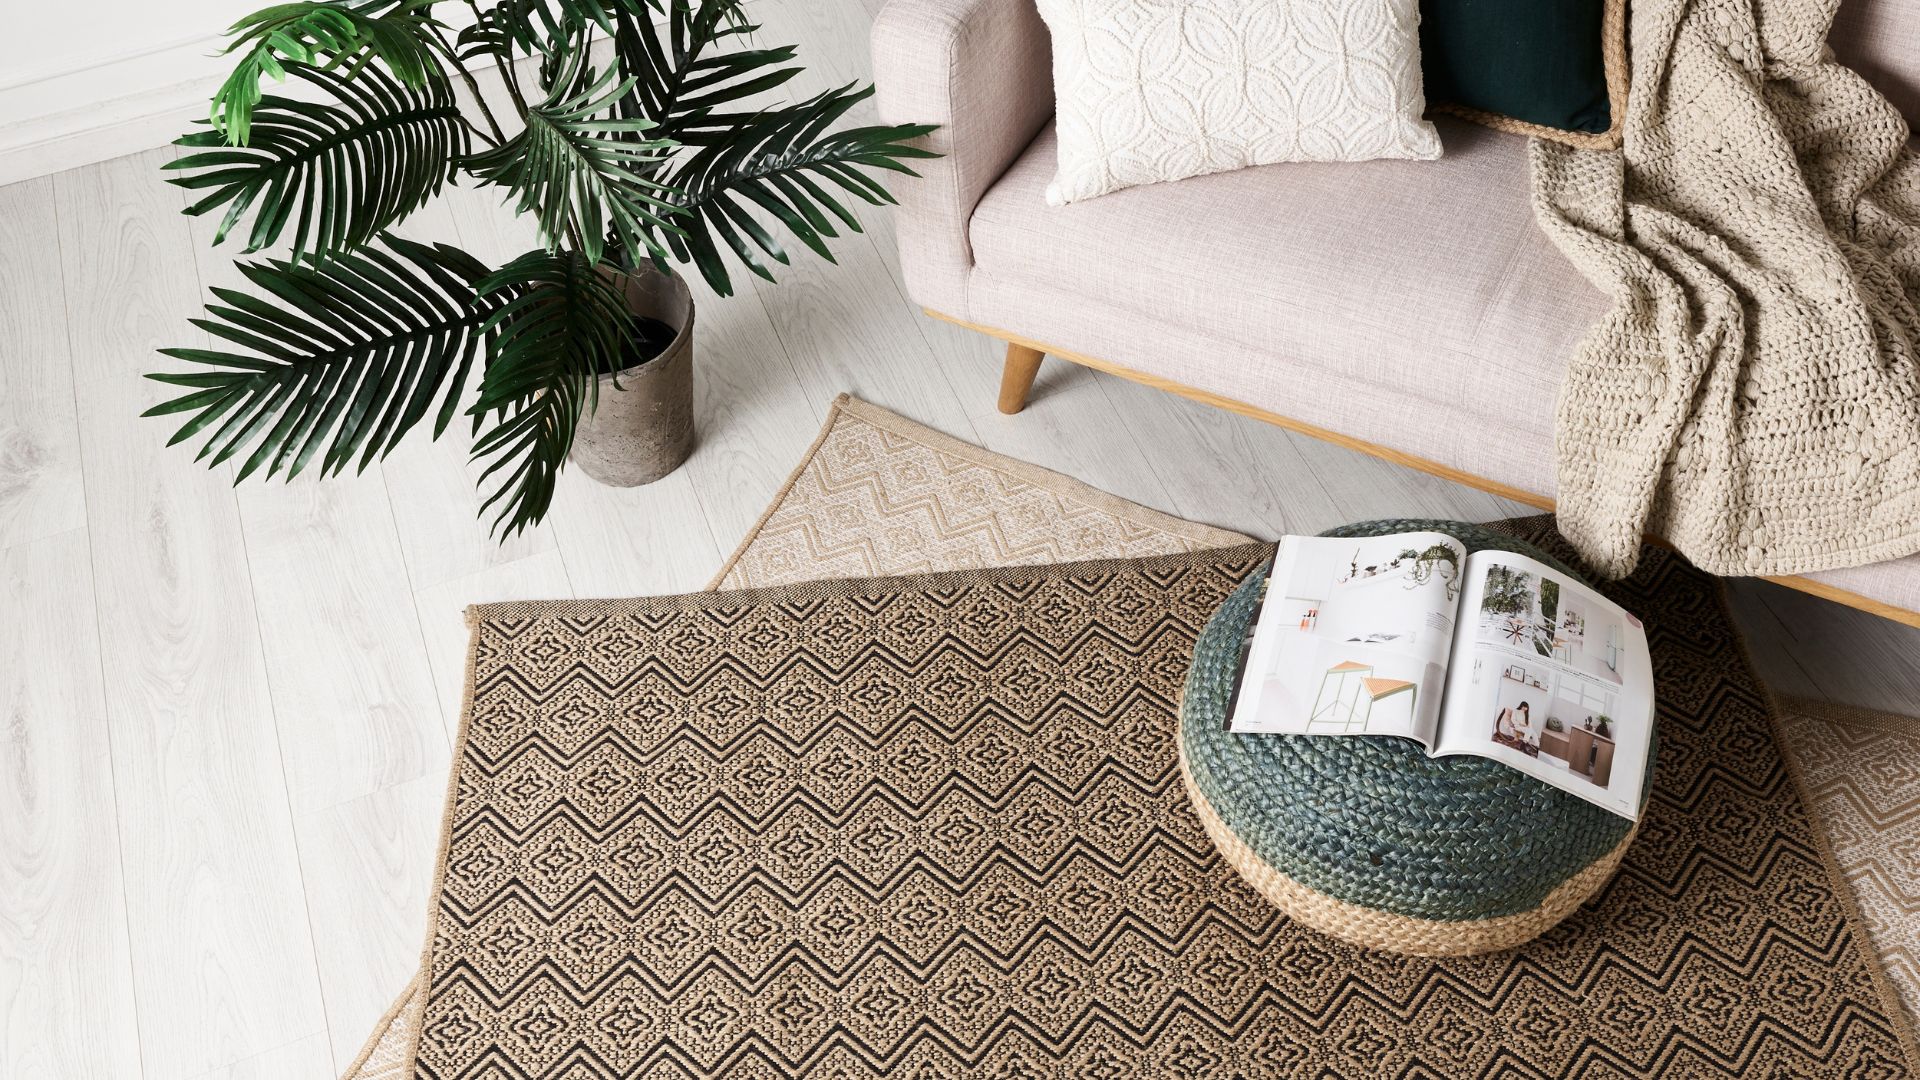 How To Layer Rugs + Other Rug Laying Ideas